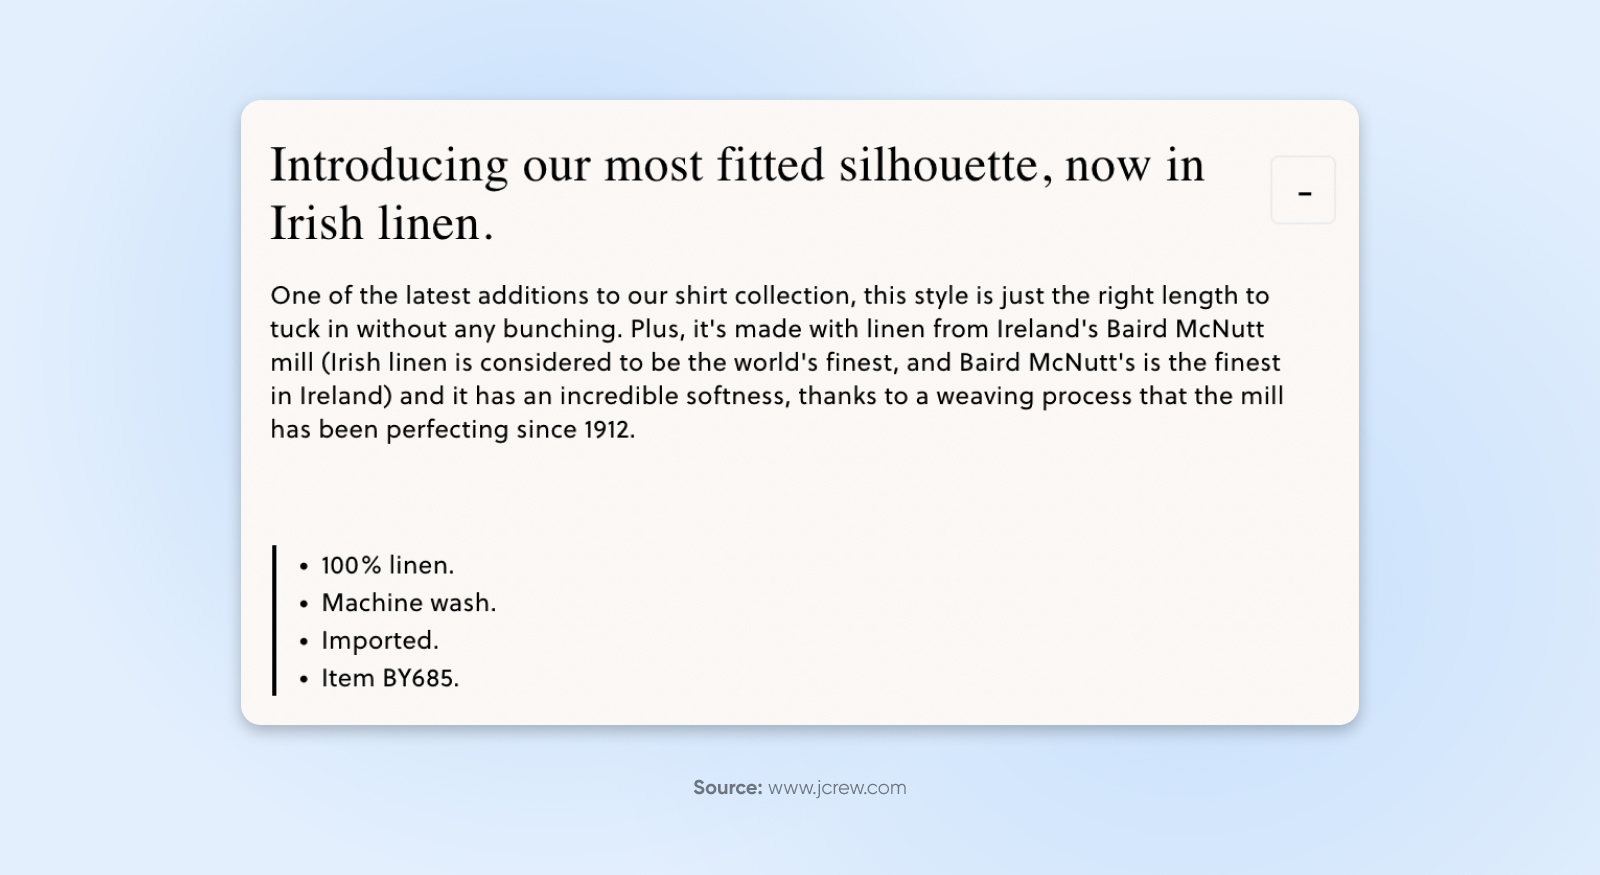 A sample product description from J.Crew provides a bulleted list of features